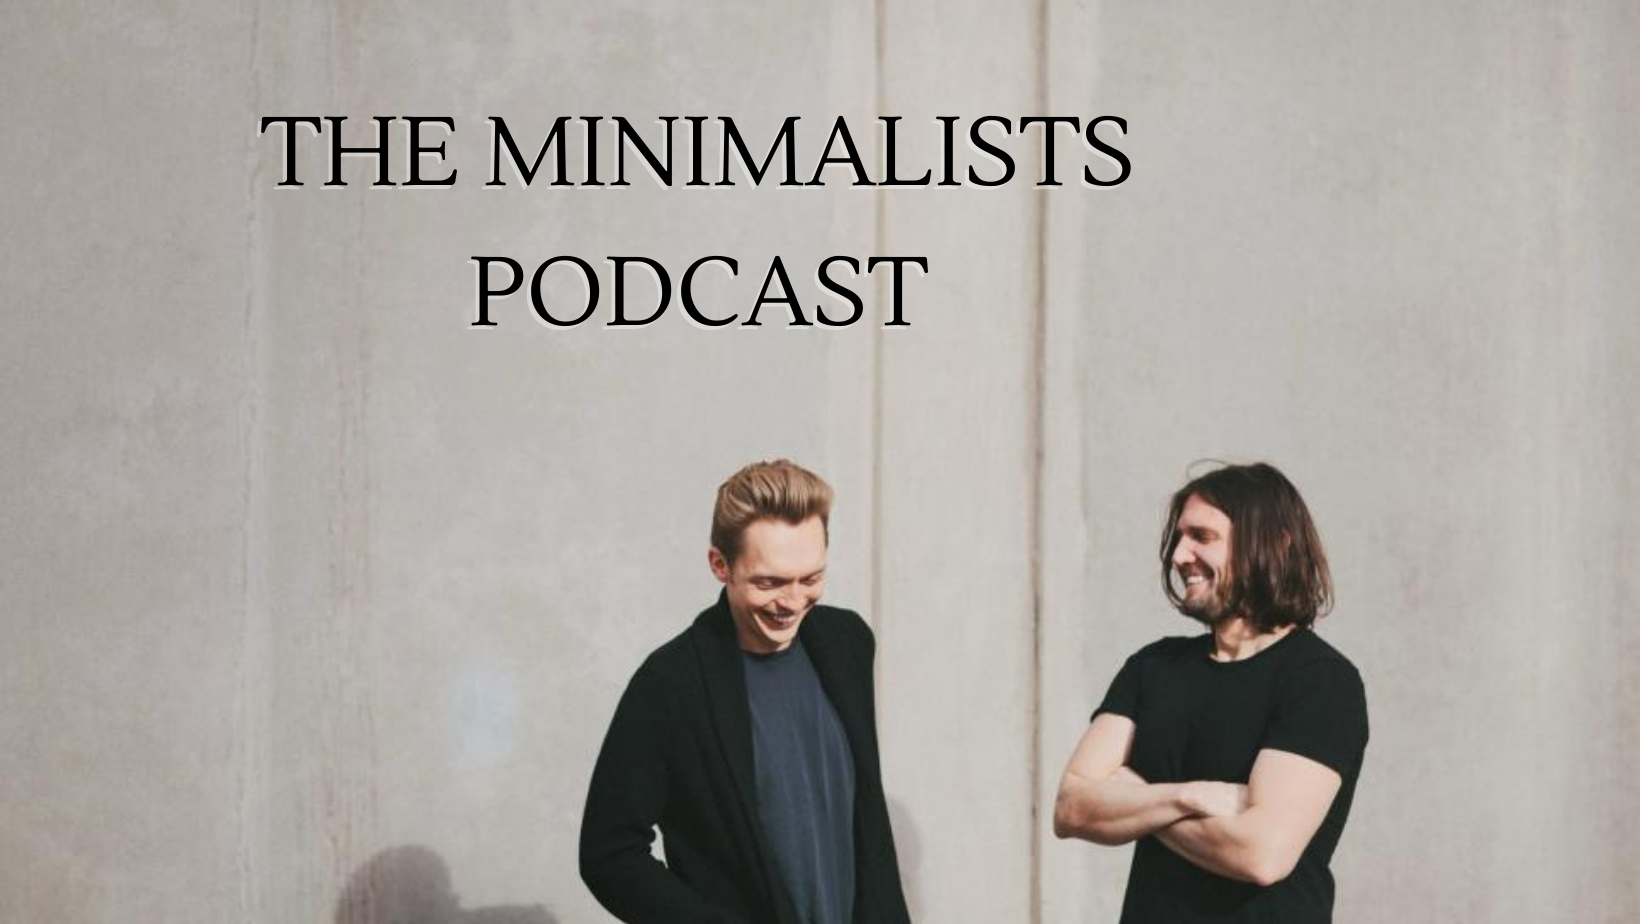 The Minimalists Podcast – Listen Here